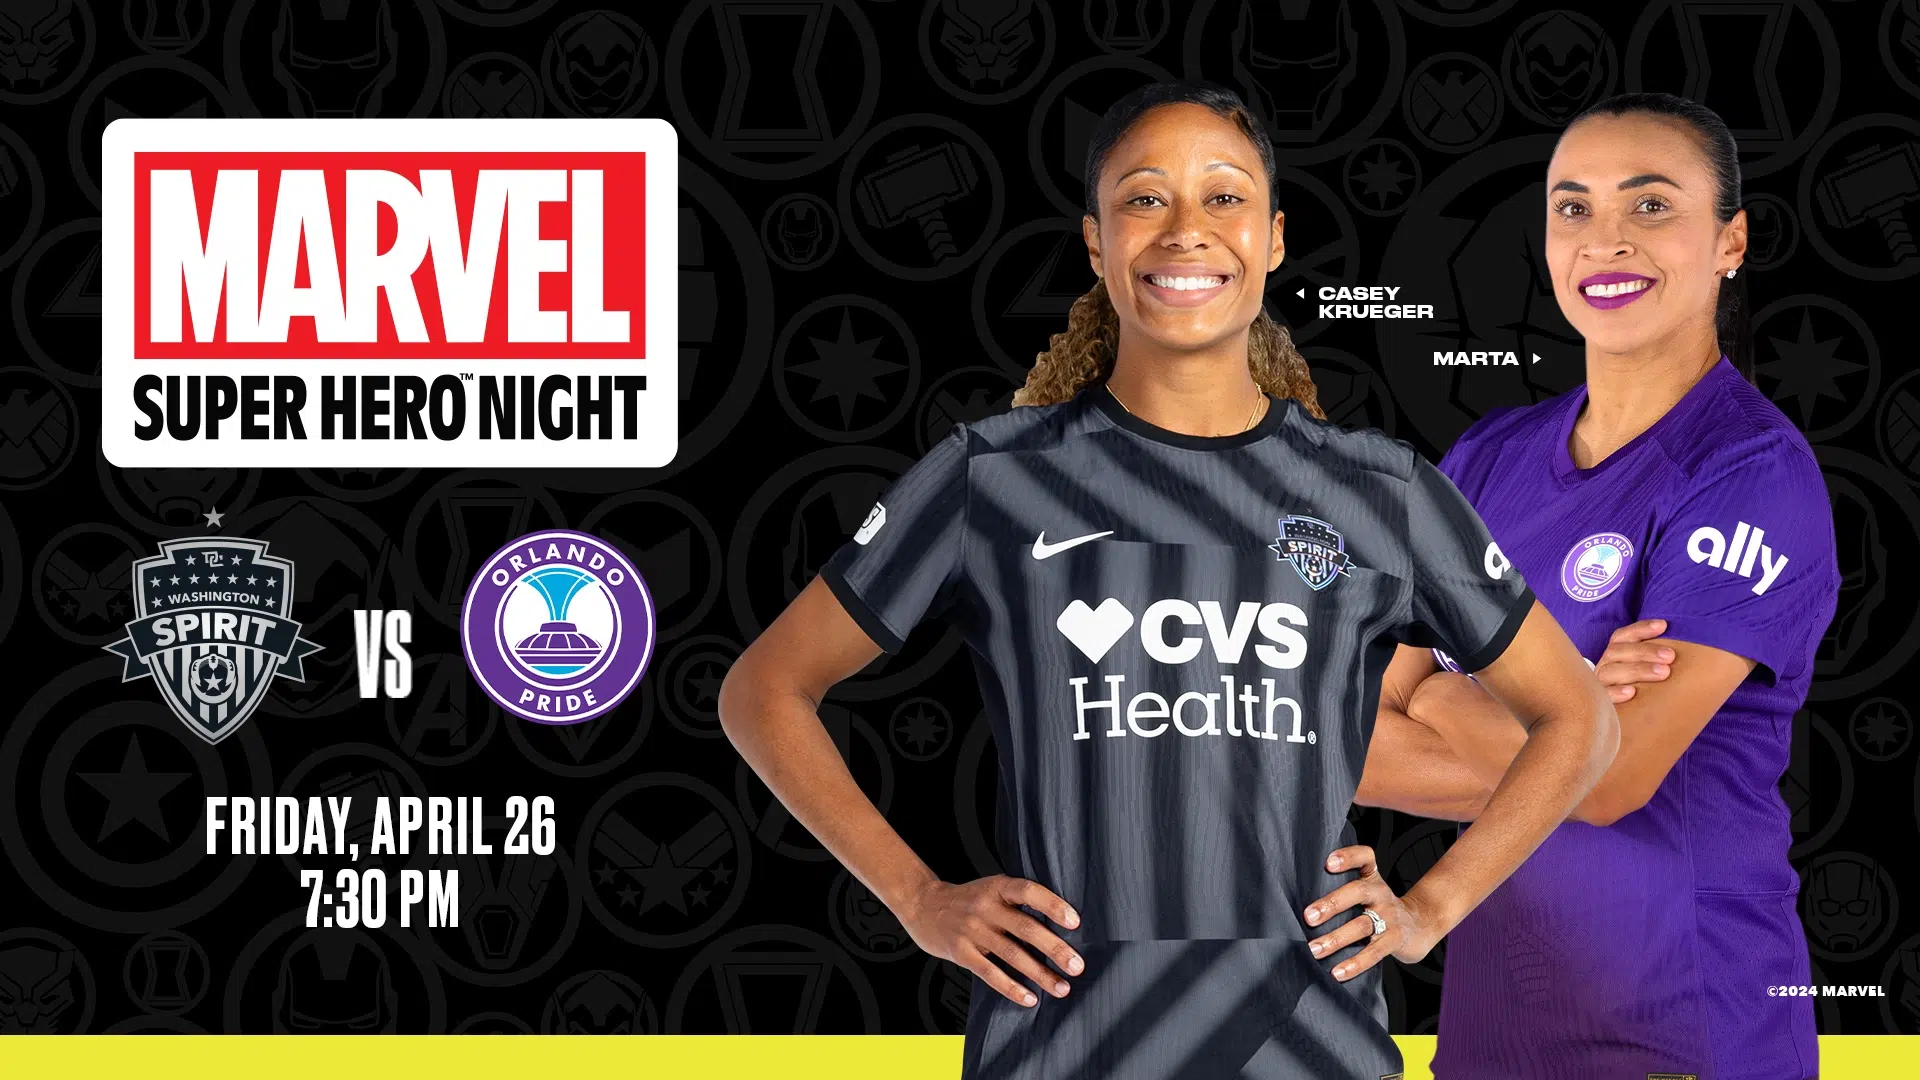 Washington Spirit and Marvel Team Up for the First Ever Marvel Super Hero™ Night on Friday, April 26 Featured Image